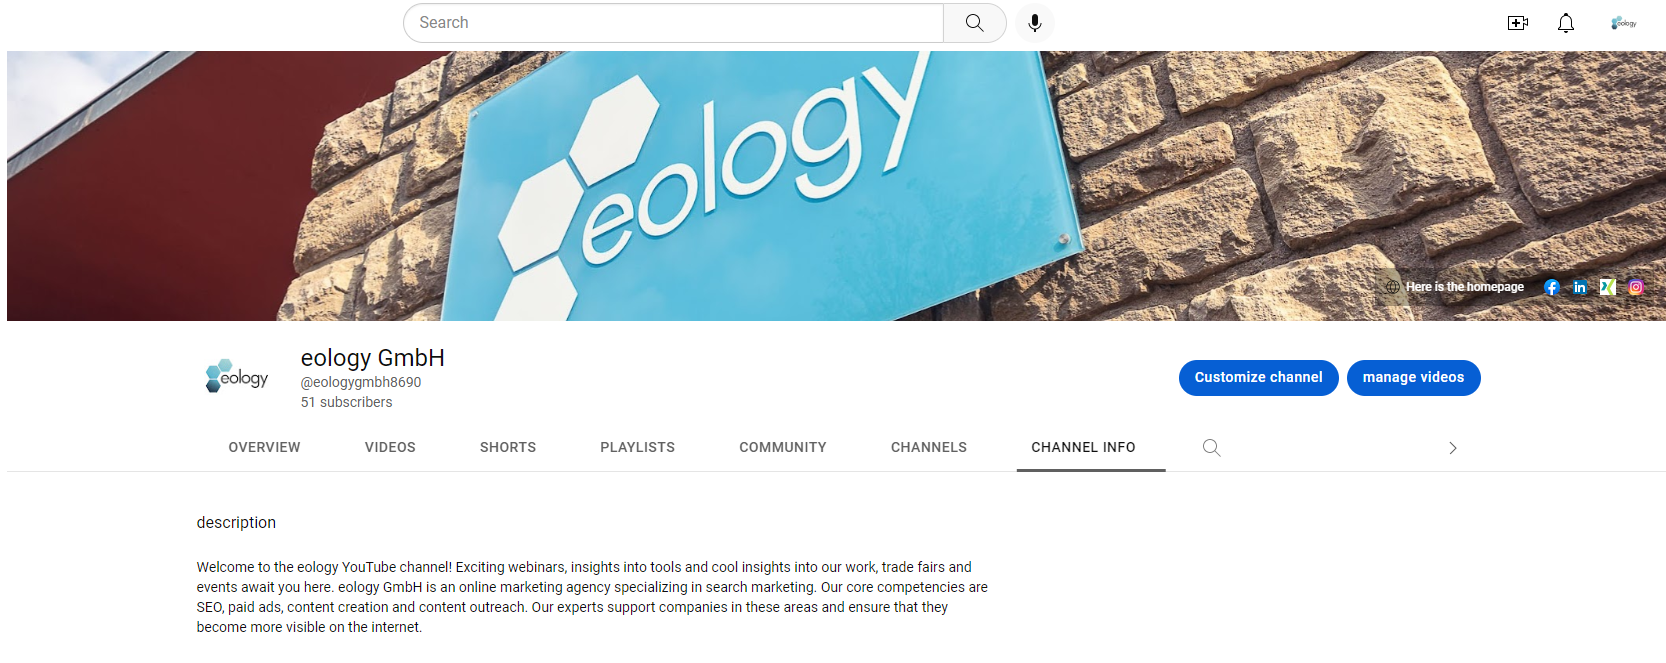 The image shows the channel info using eology's YouTube channel as an example.